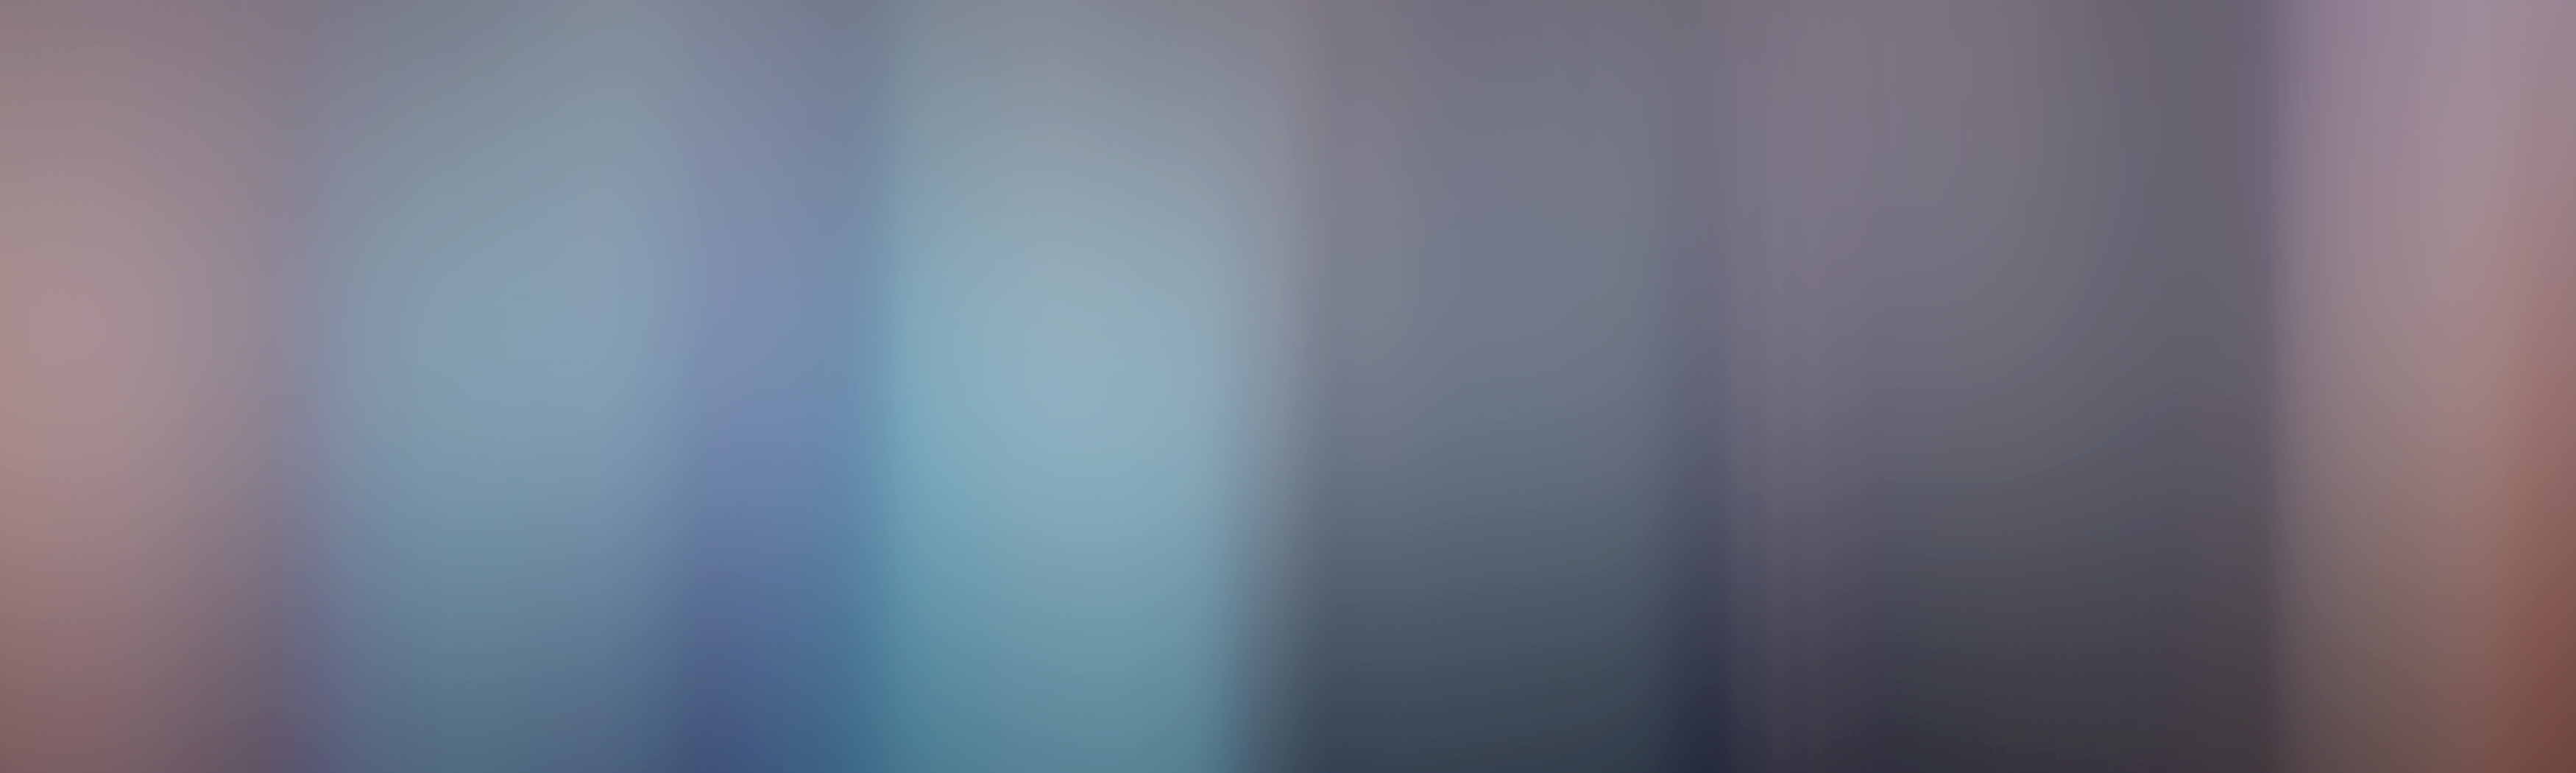 Abstract Colored Blur Lines Background and Blurred